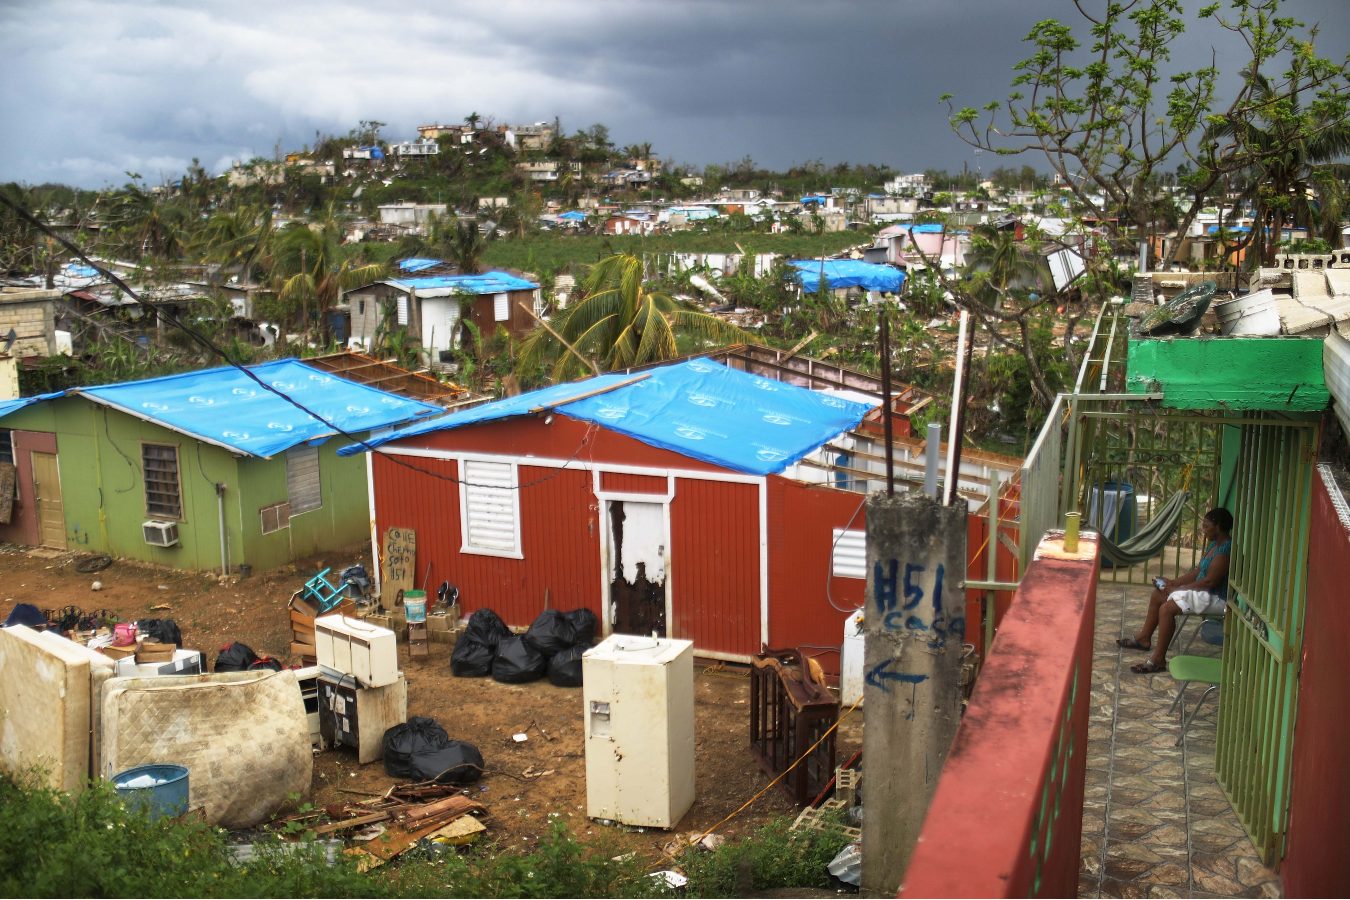 A series of homes with blue rooftop tarps in the aftermath of Hurricane Maria in Puerto Rico.